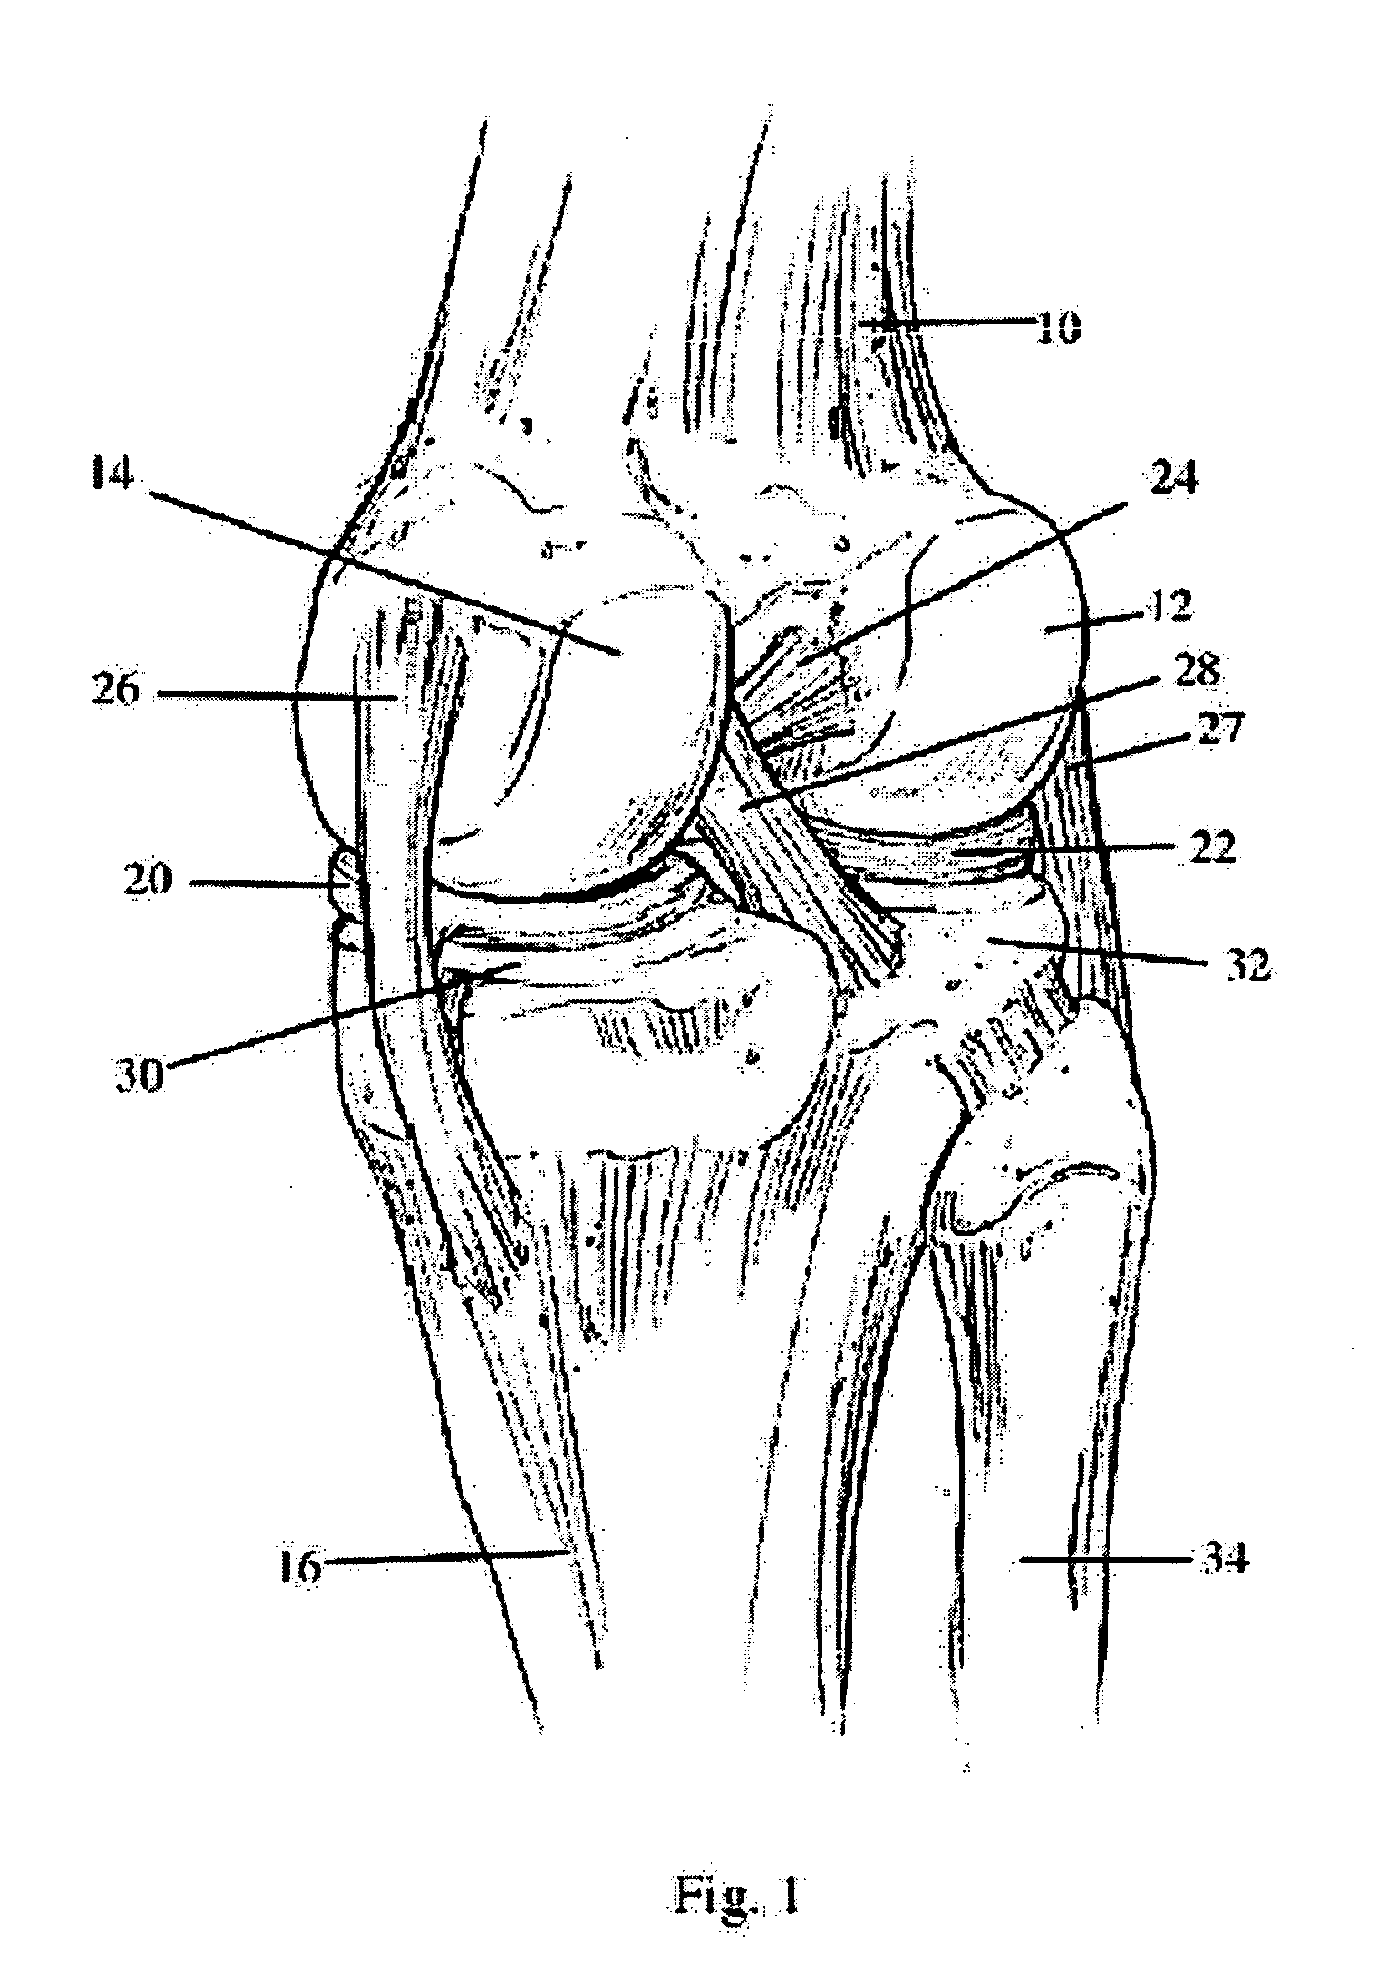 Modular apparatus and method for sculpting the surface of a joint